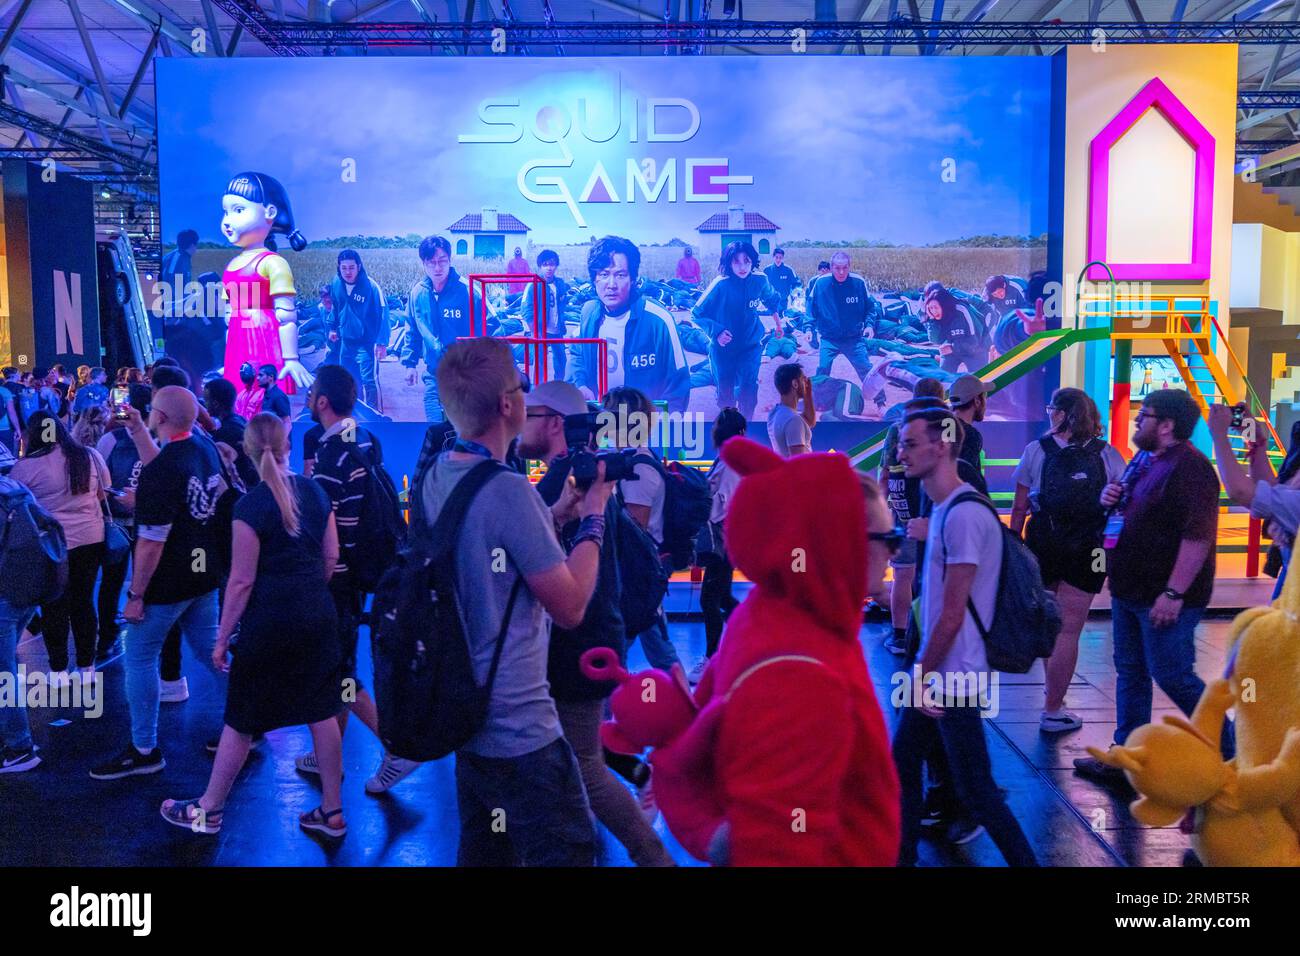 Gamescom, the world's largest trade fair for video and computer games, in Cologne, Germany, Squid game, Stock Photo